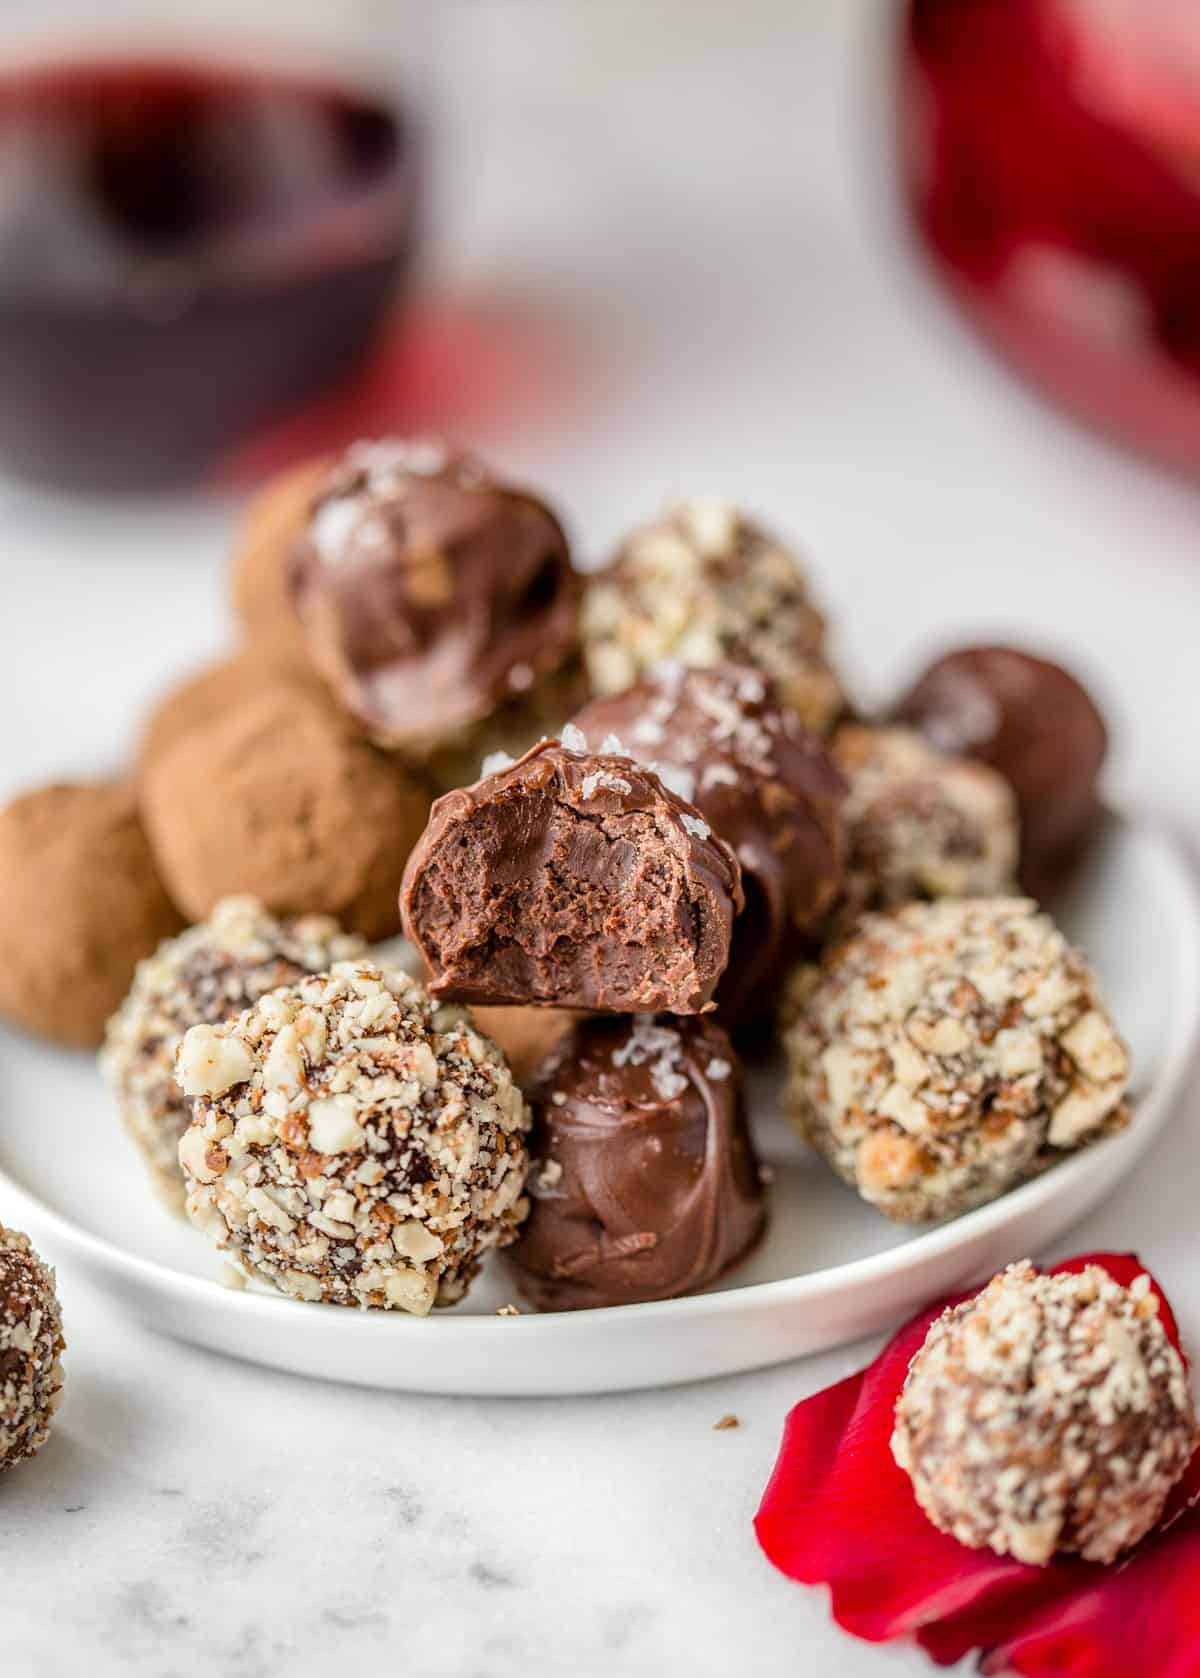 Homemade Chocolate Truffles with a bite taken out